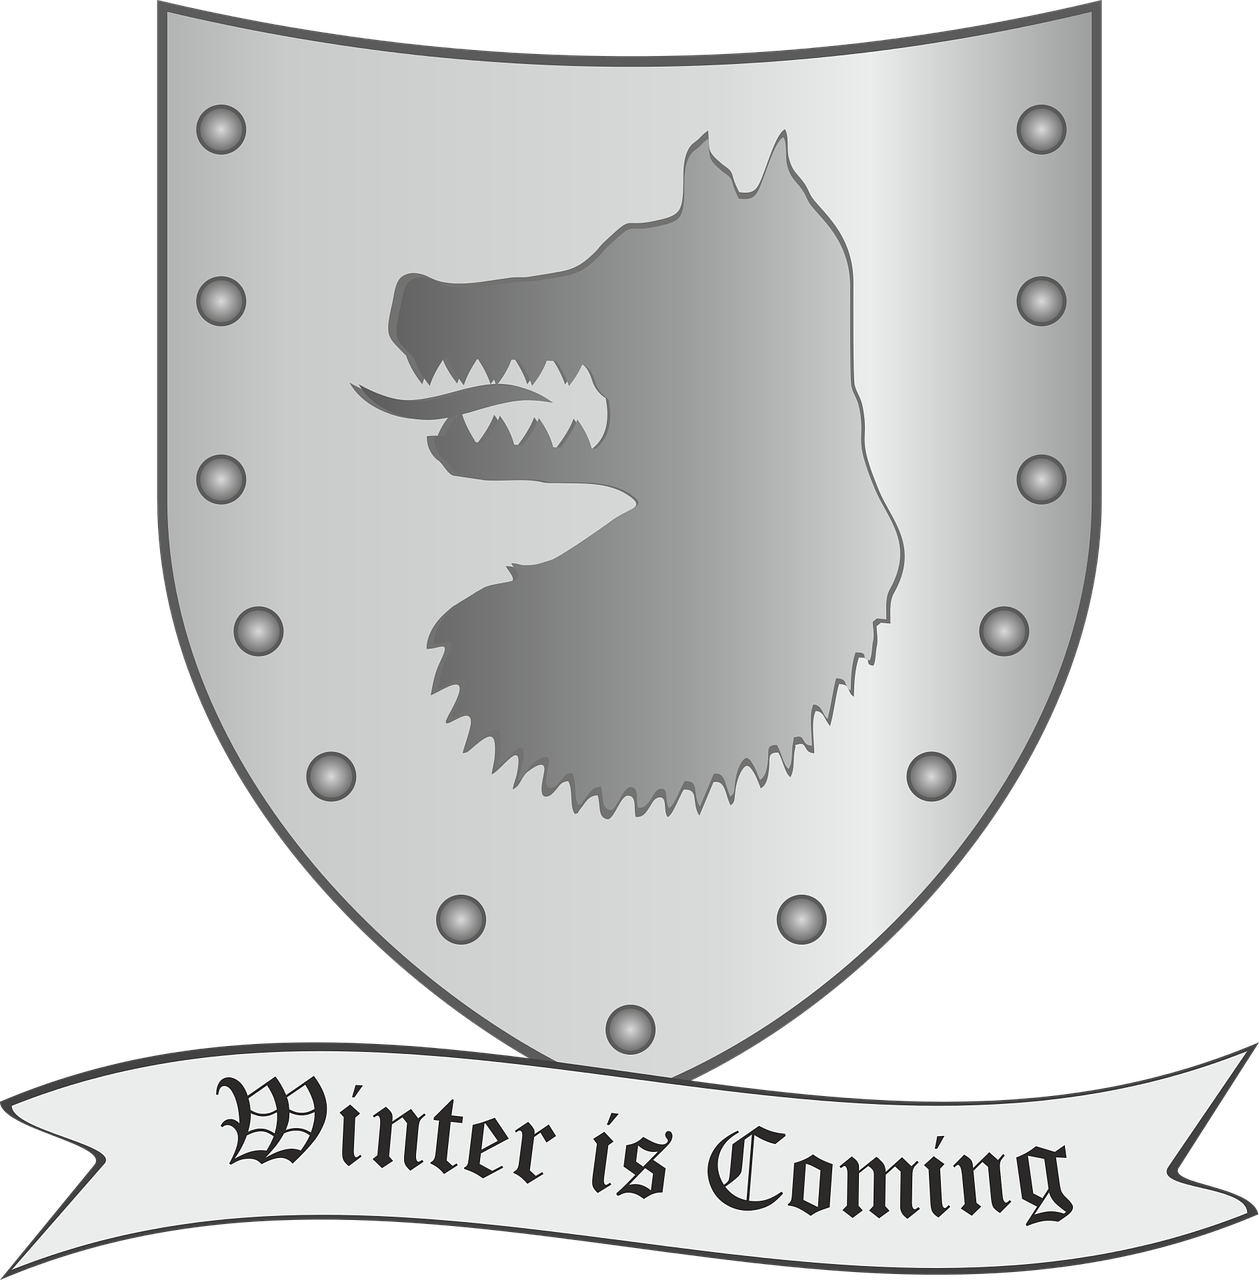 game of thrones coat of arms shield free photo